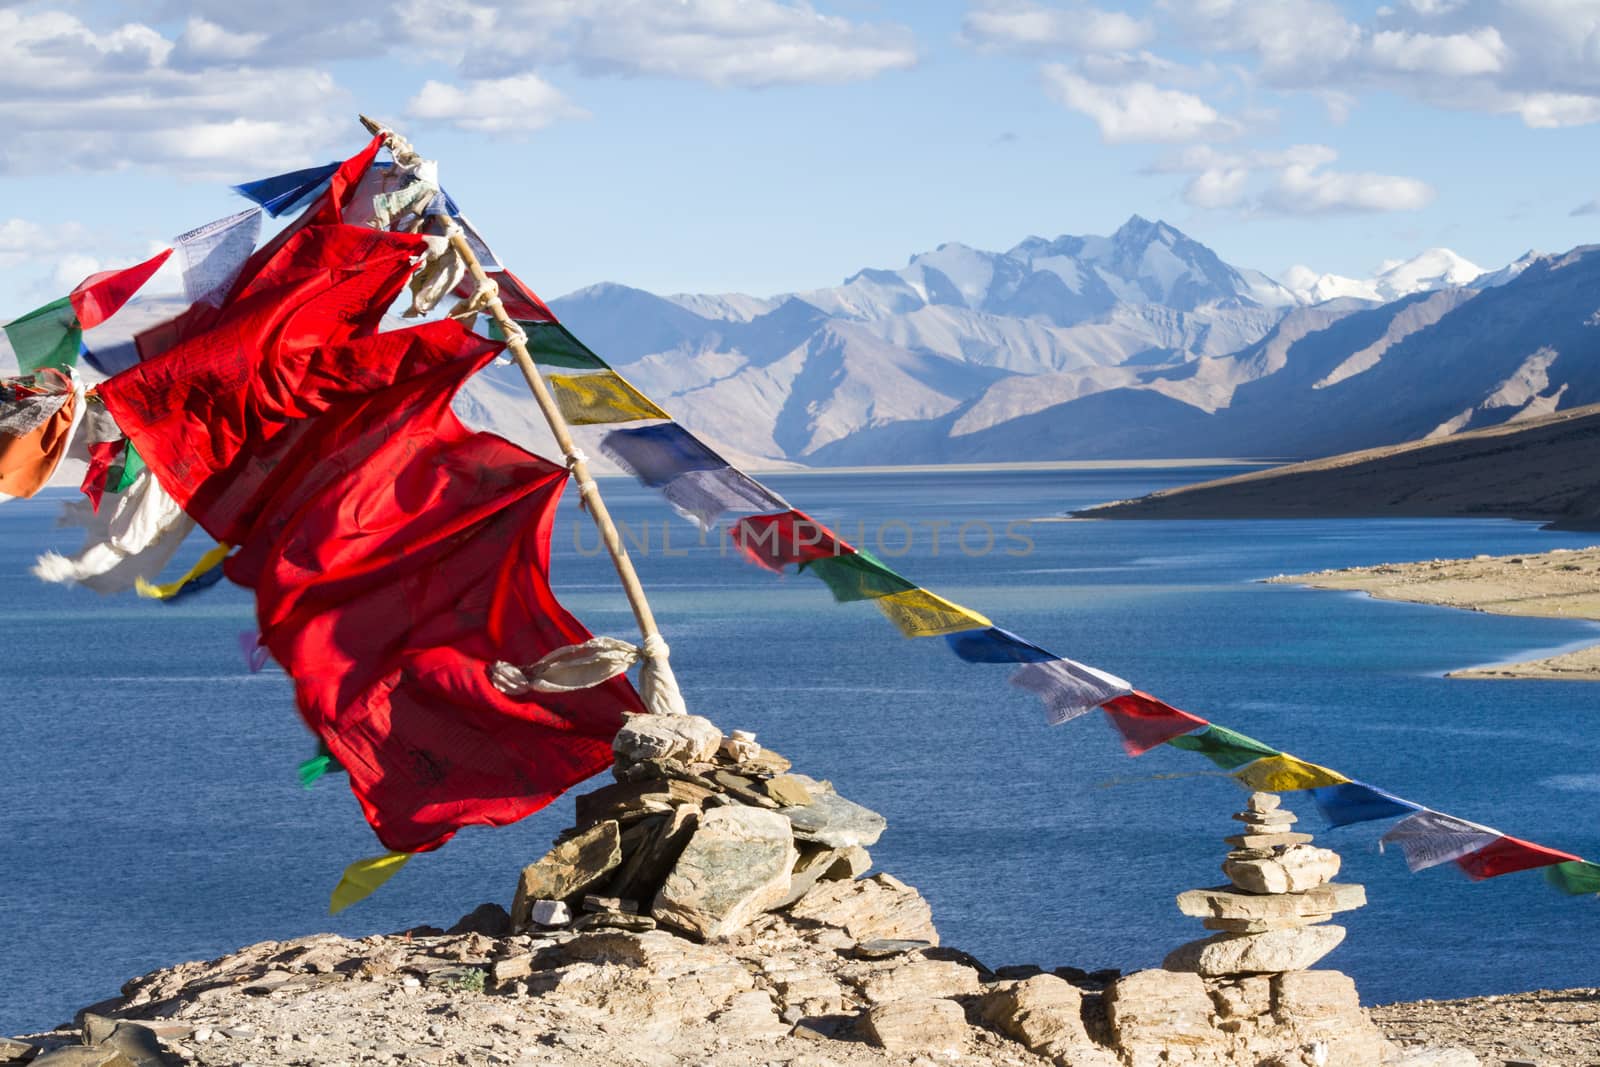 Buddhist prayer flags on the wind against the blue lake, mountains and sky by straannick